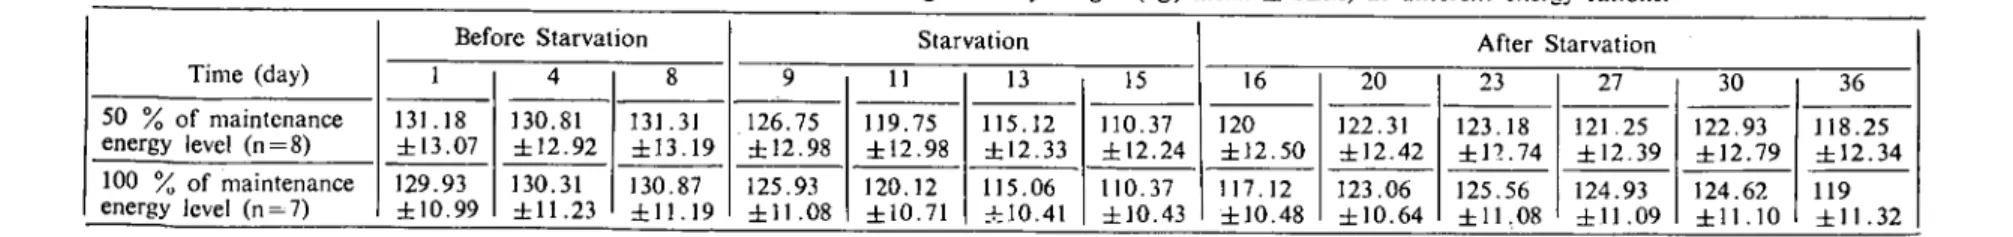 Table 4: Effeet of starvation and refeeding on plasma T. levels (n mol Ilitre; mean ::!: SEM) at different Energy rations